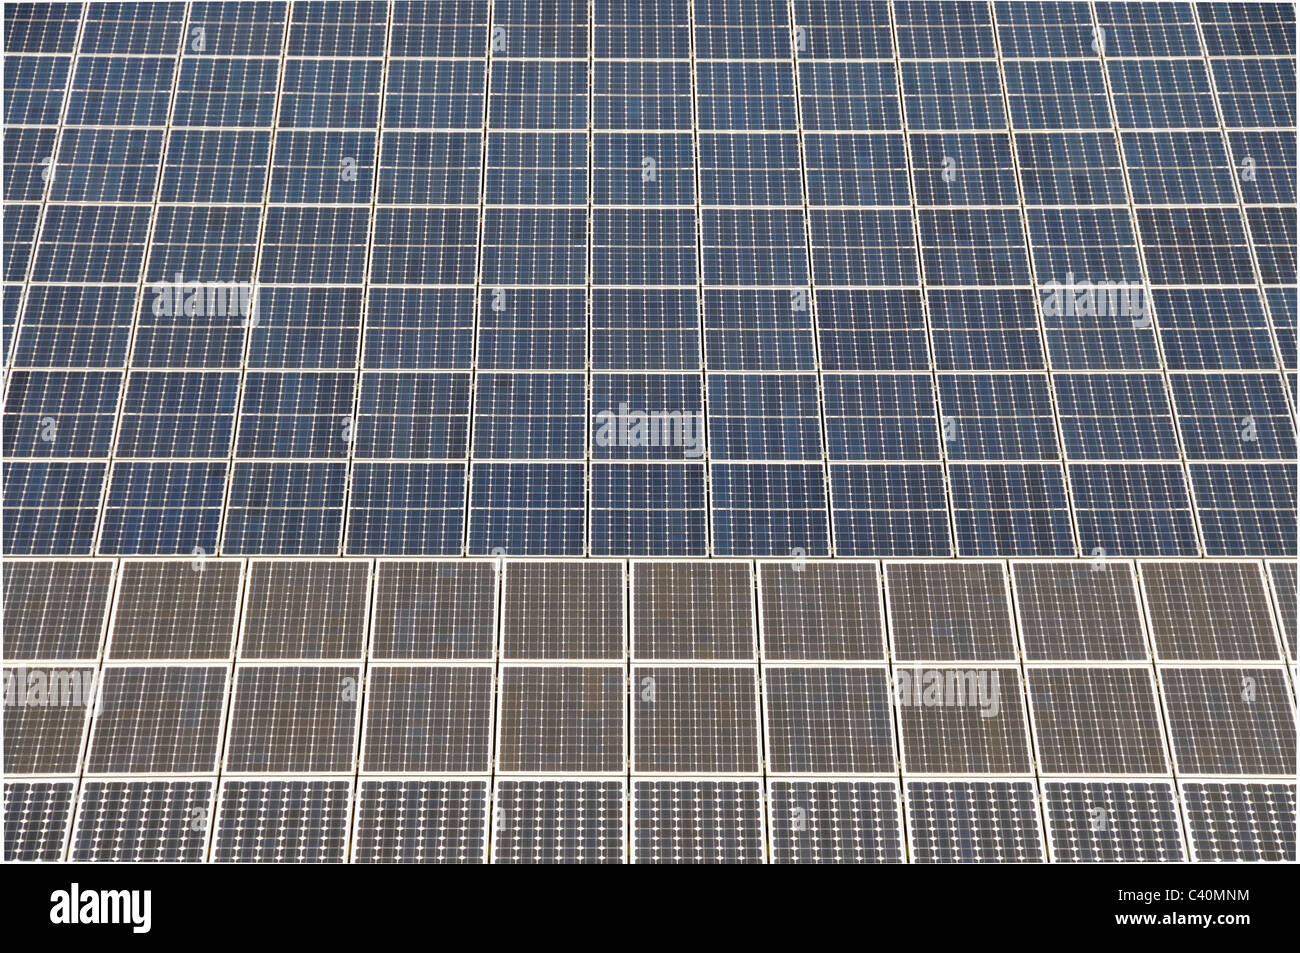 Roof, electricity, power production, energy source, energy supply, photovoltaic, complex, modules, solar arrangement, solar ener Stock Photo